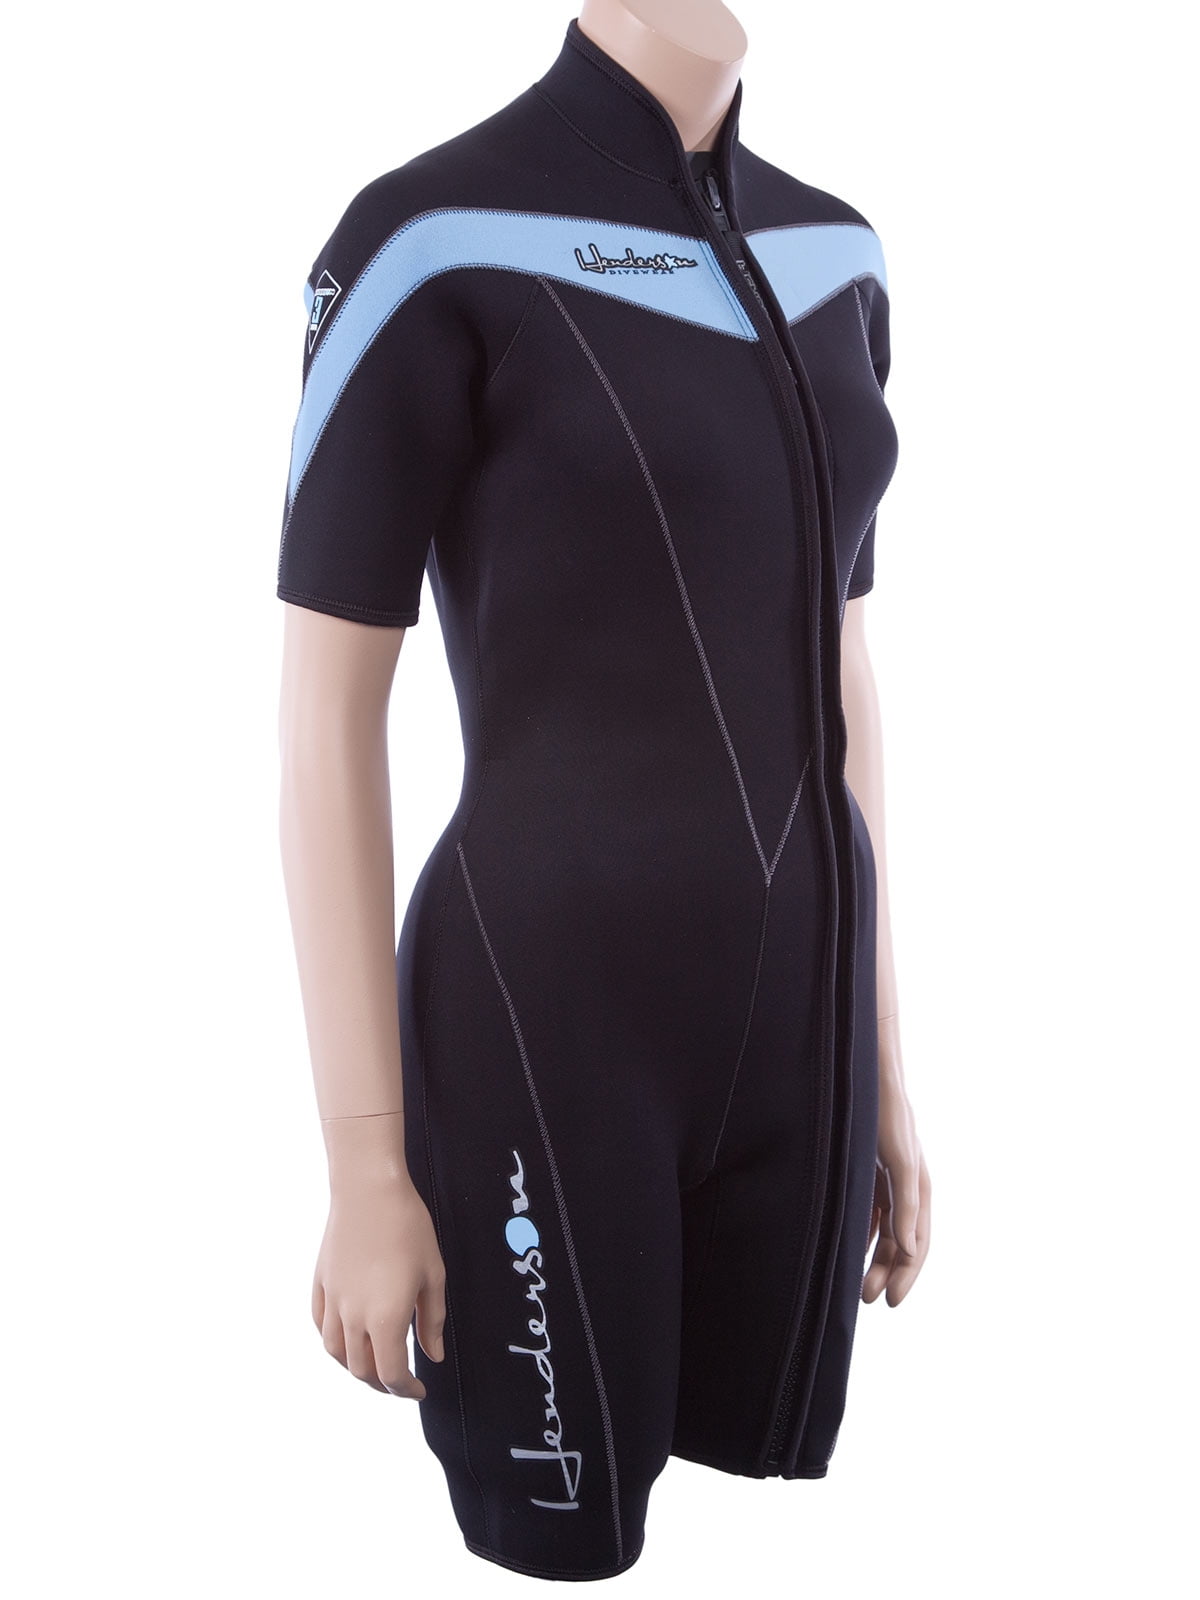 Henderson Thermoprene 3mm womens front zip wetsuit with Plus, Tall, & Petite 